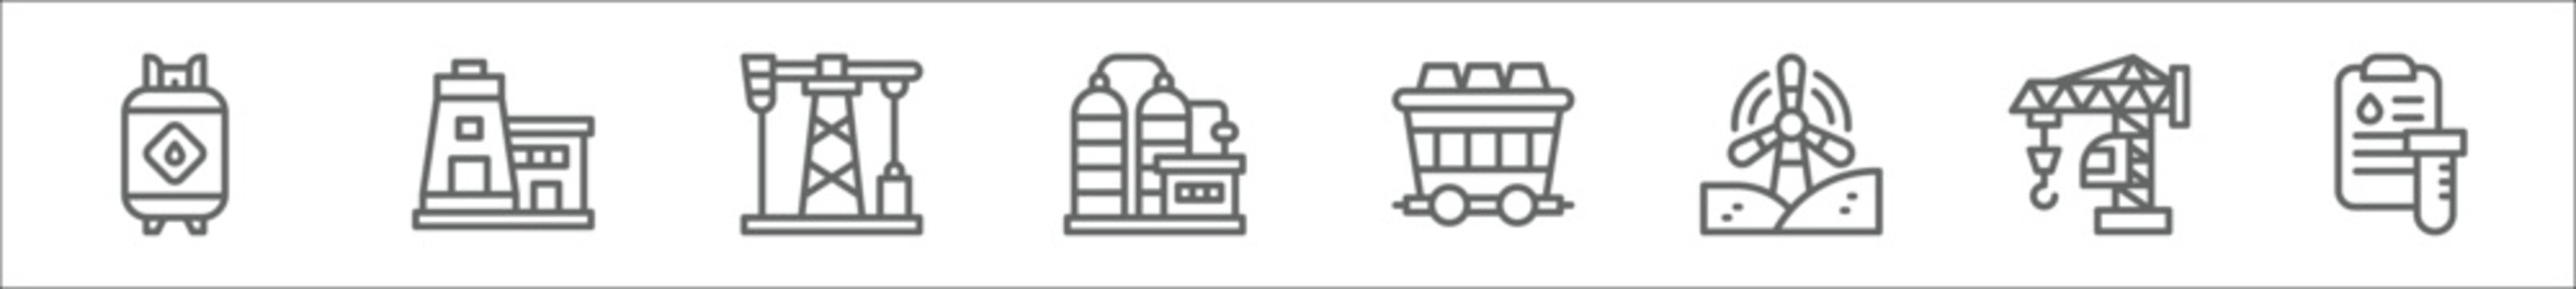 outline set of oil and gas industry line icons. linear vector icons such as gas cylinder, power plant, oil pump, power plant, mining cart, wind power, crane, data report